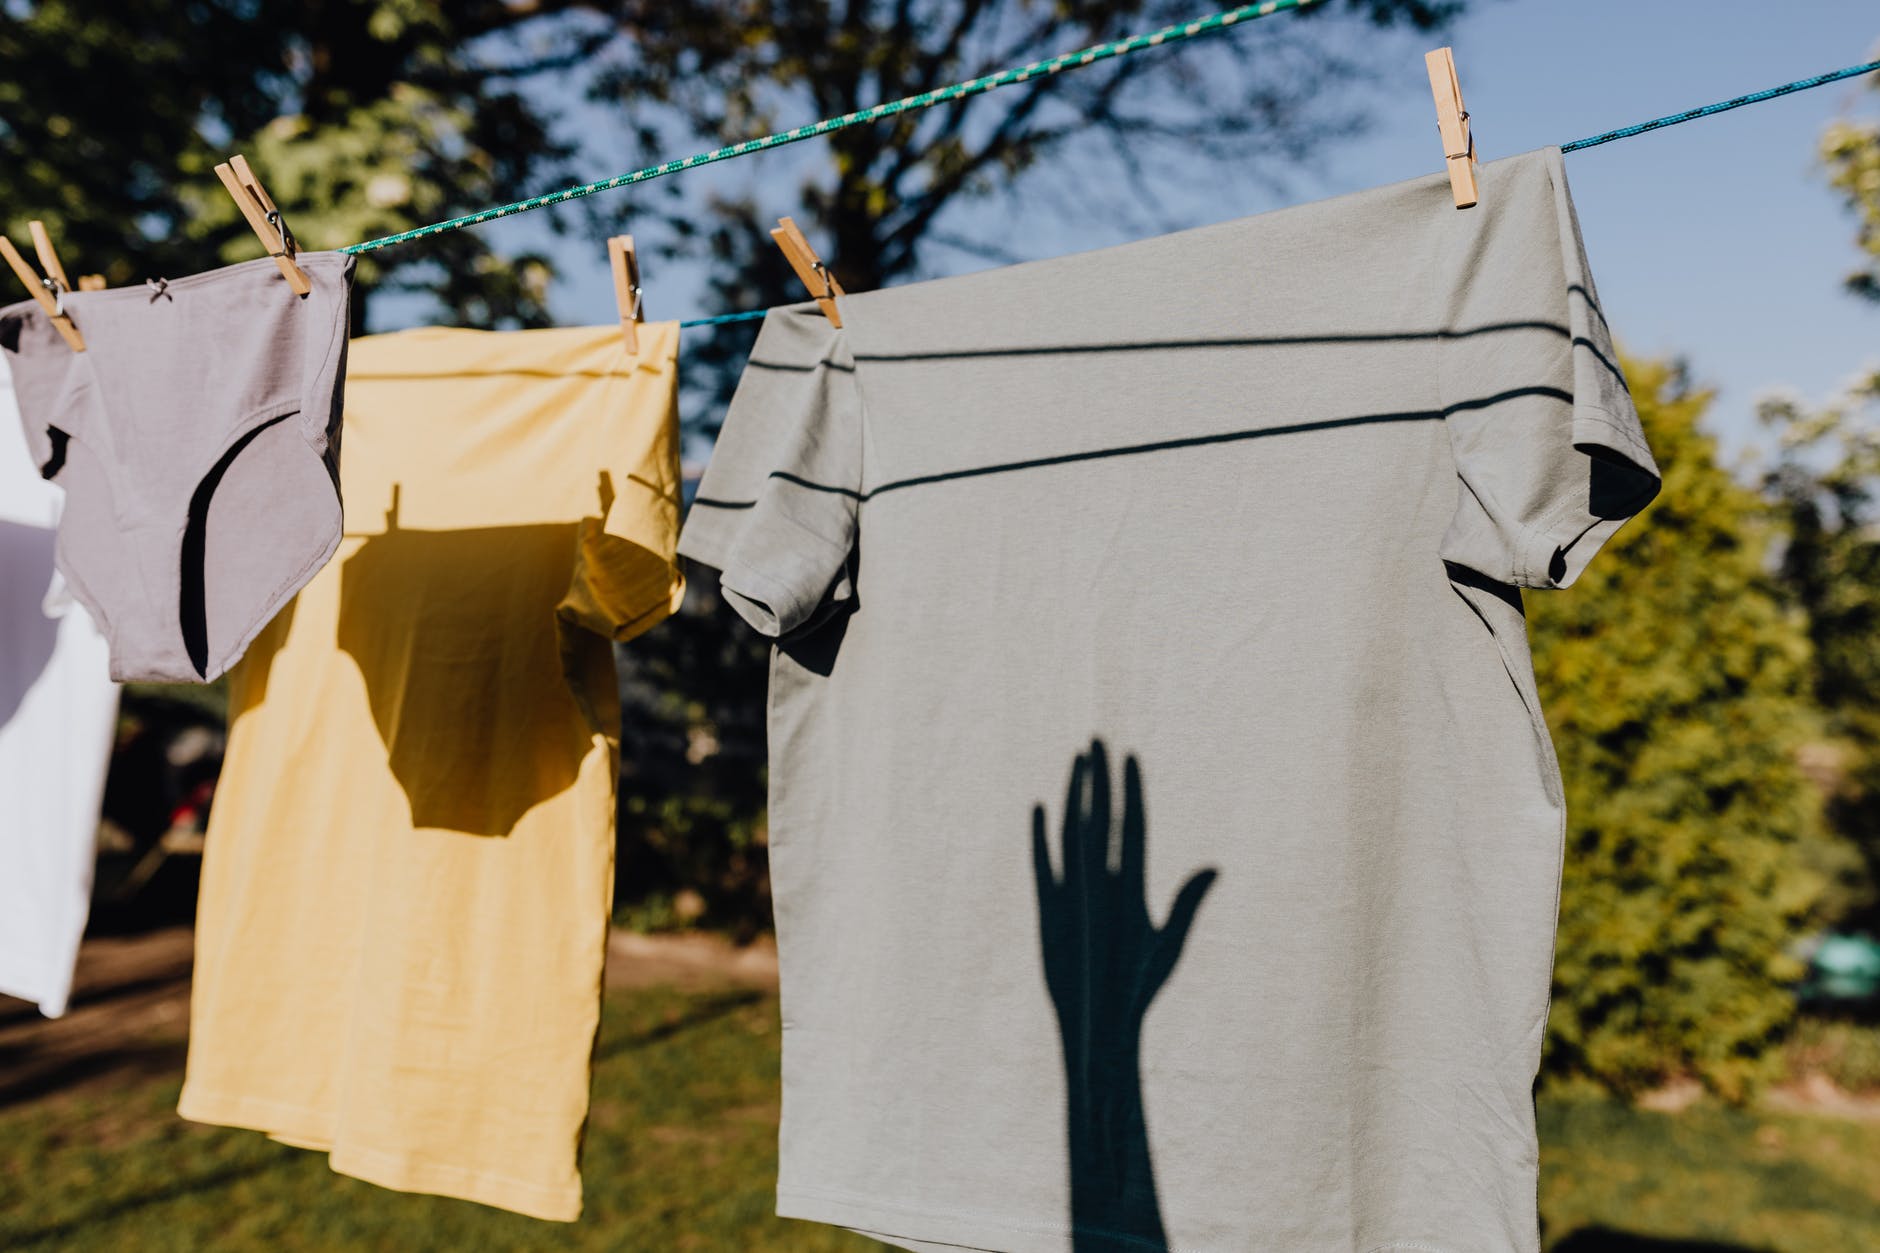 clothes drying on rope with clothespins in garden